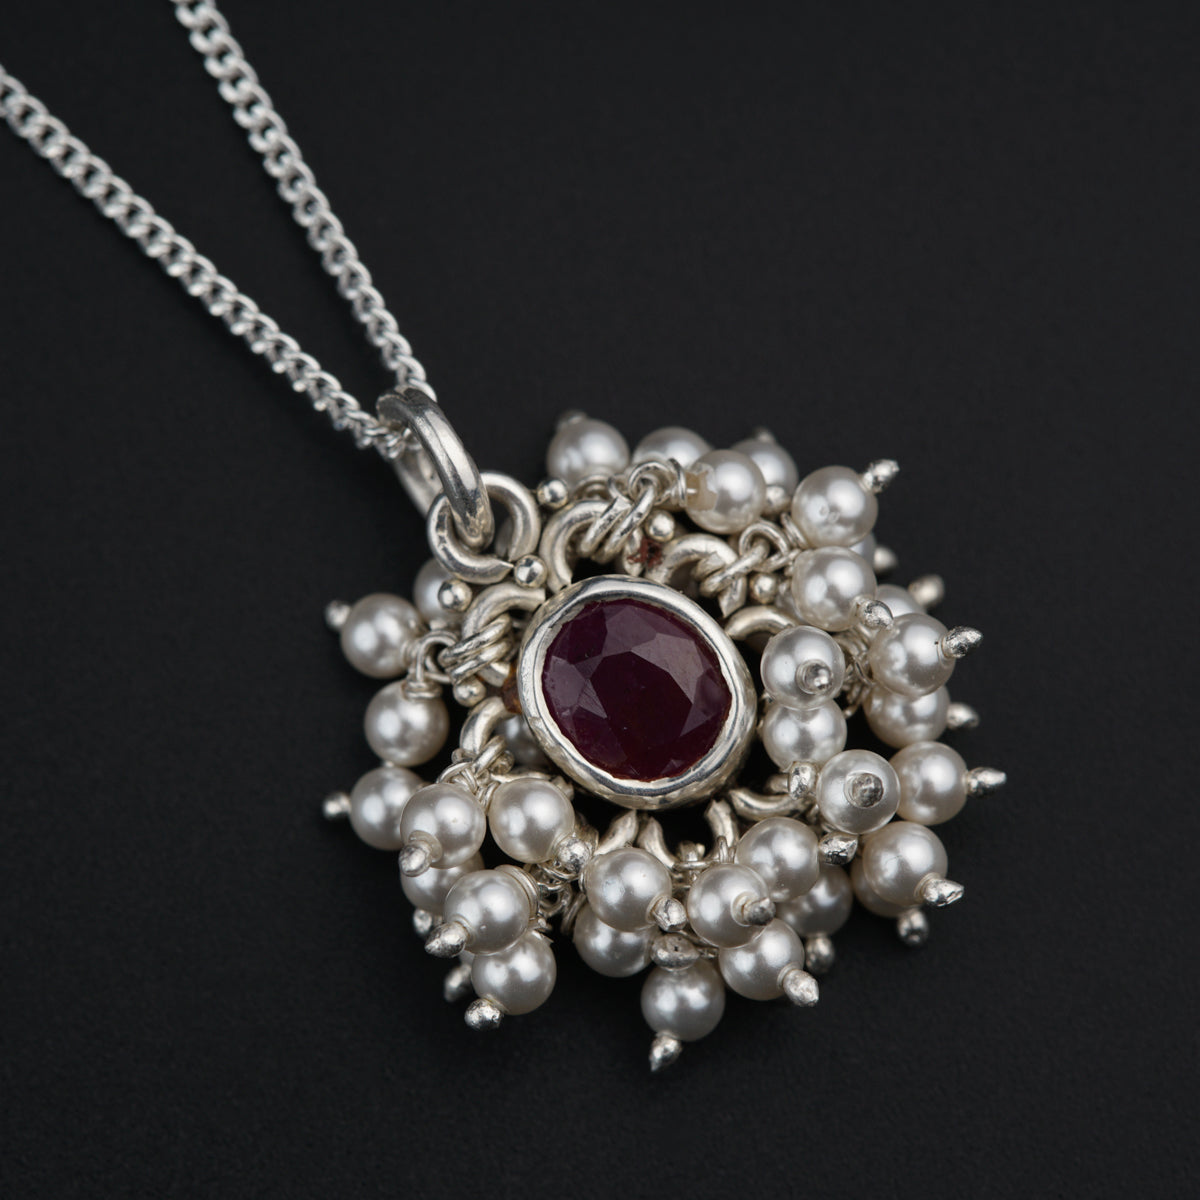 Silver Chain Necklace with Precious Stone (Ruby) and Pearls